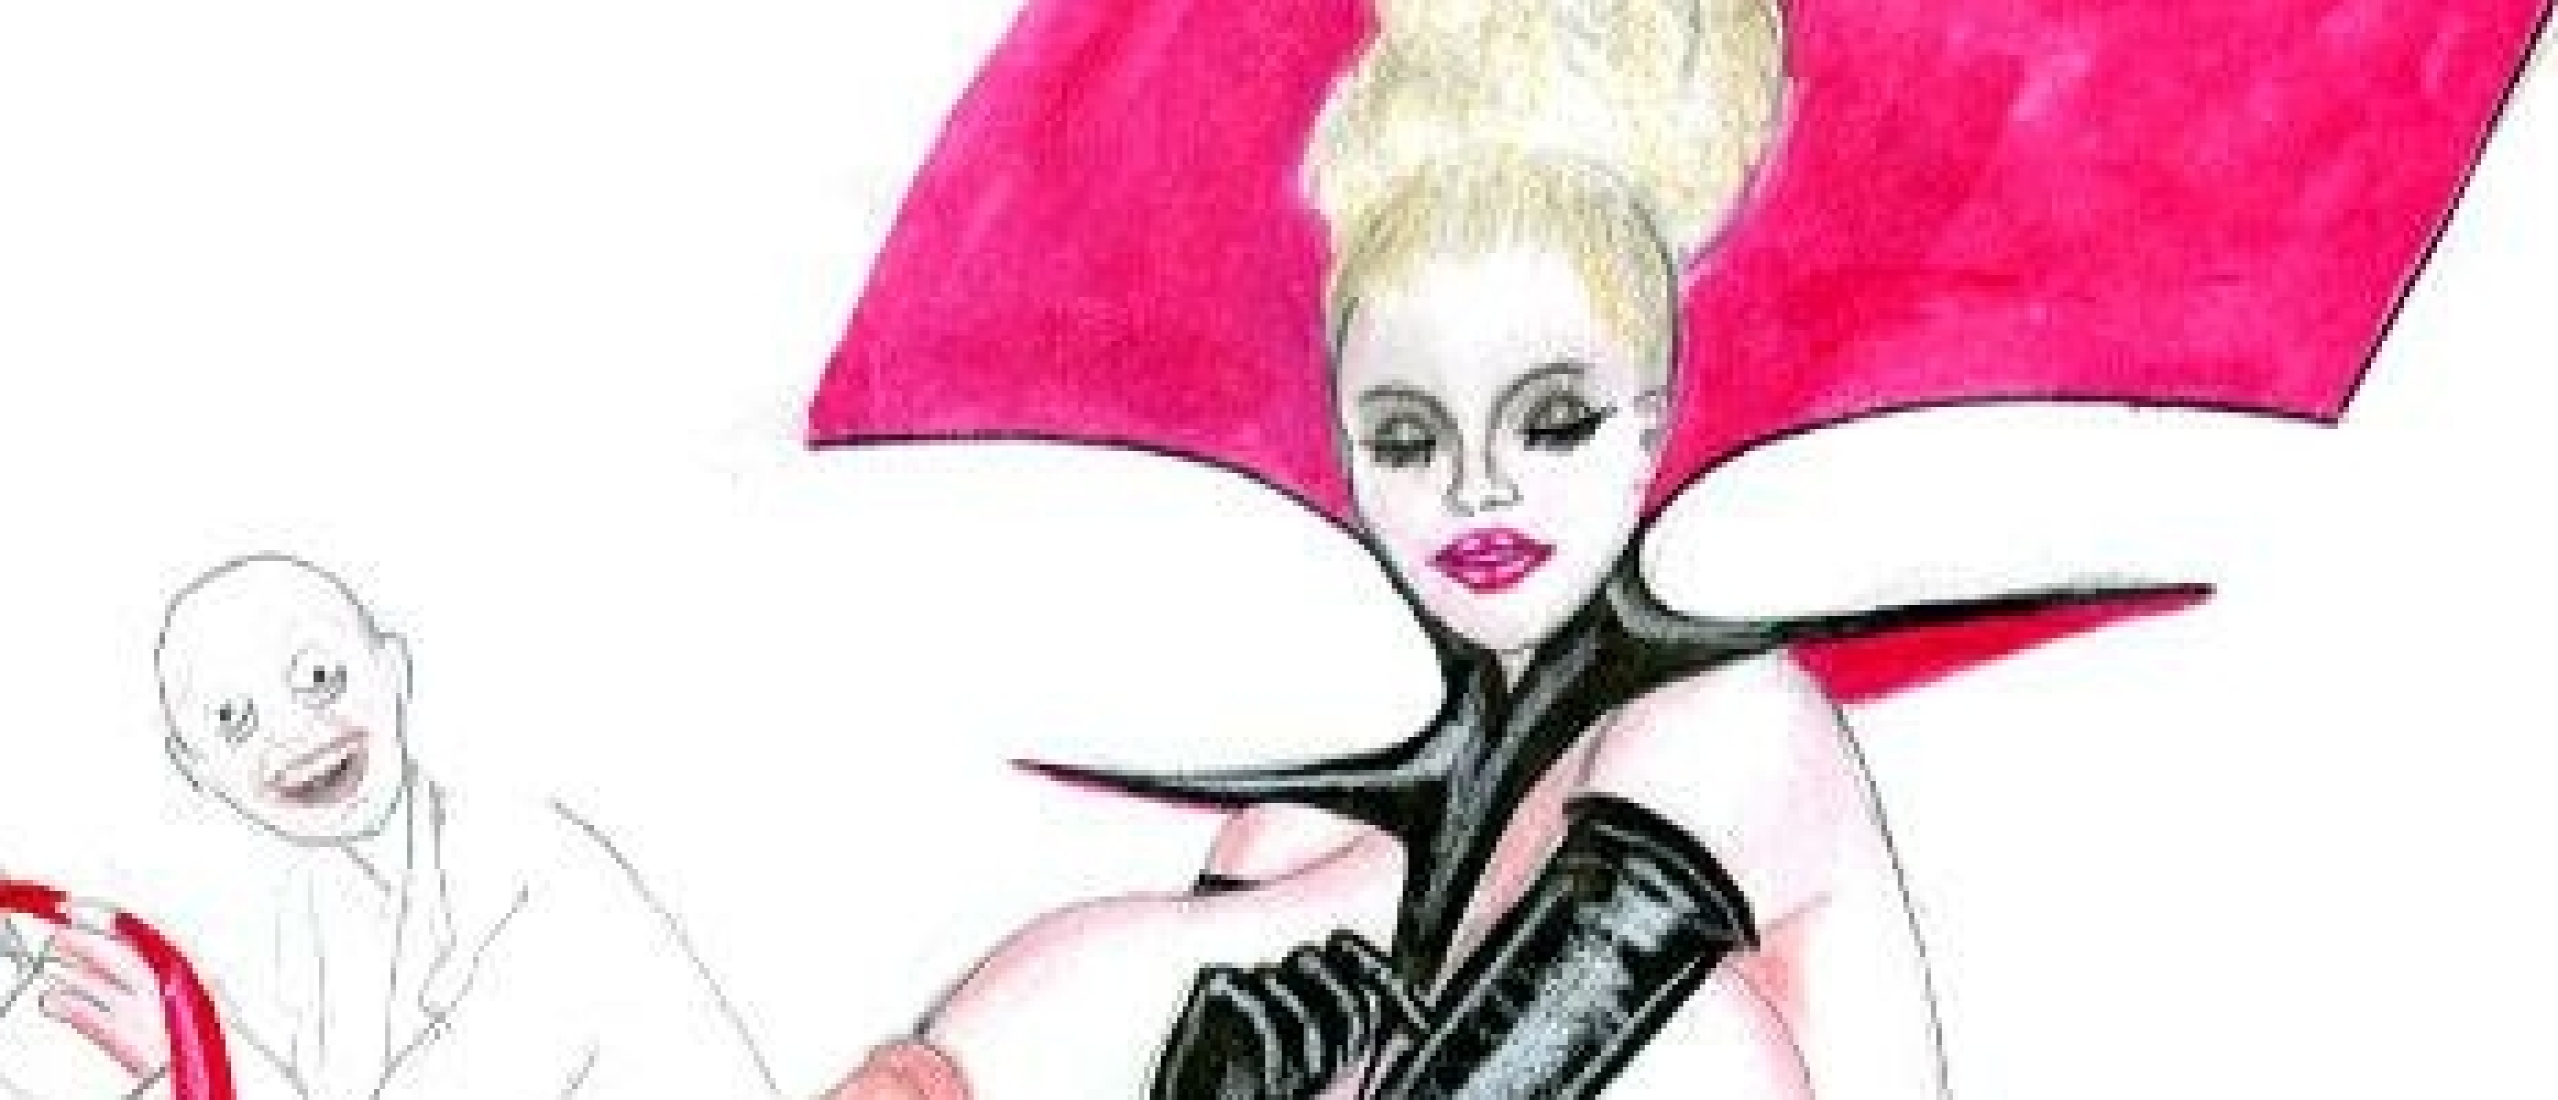 12 Grotesque Femdom Fantasies By the Enigmatic Mormax